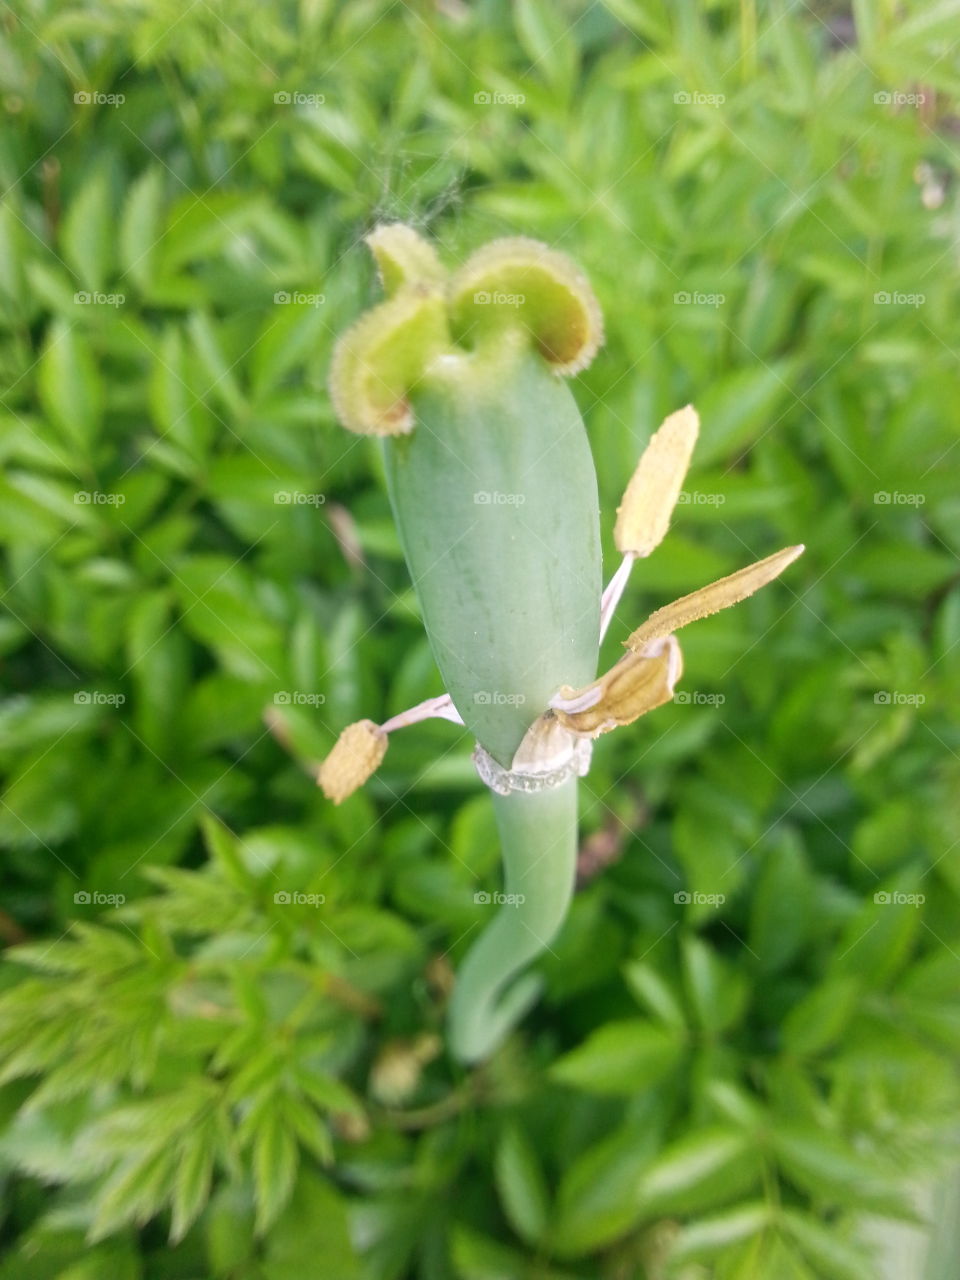 About to Bloom. Optimistic flower bud, reaching up about to become something beautiful..